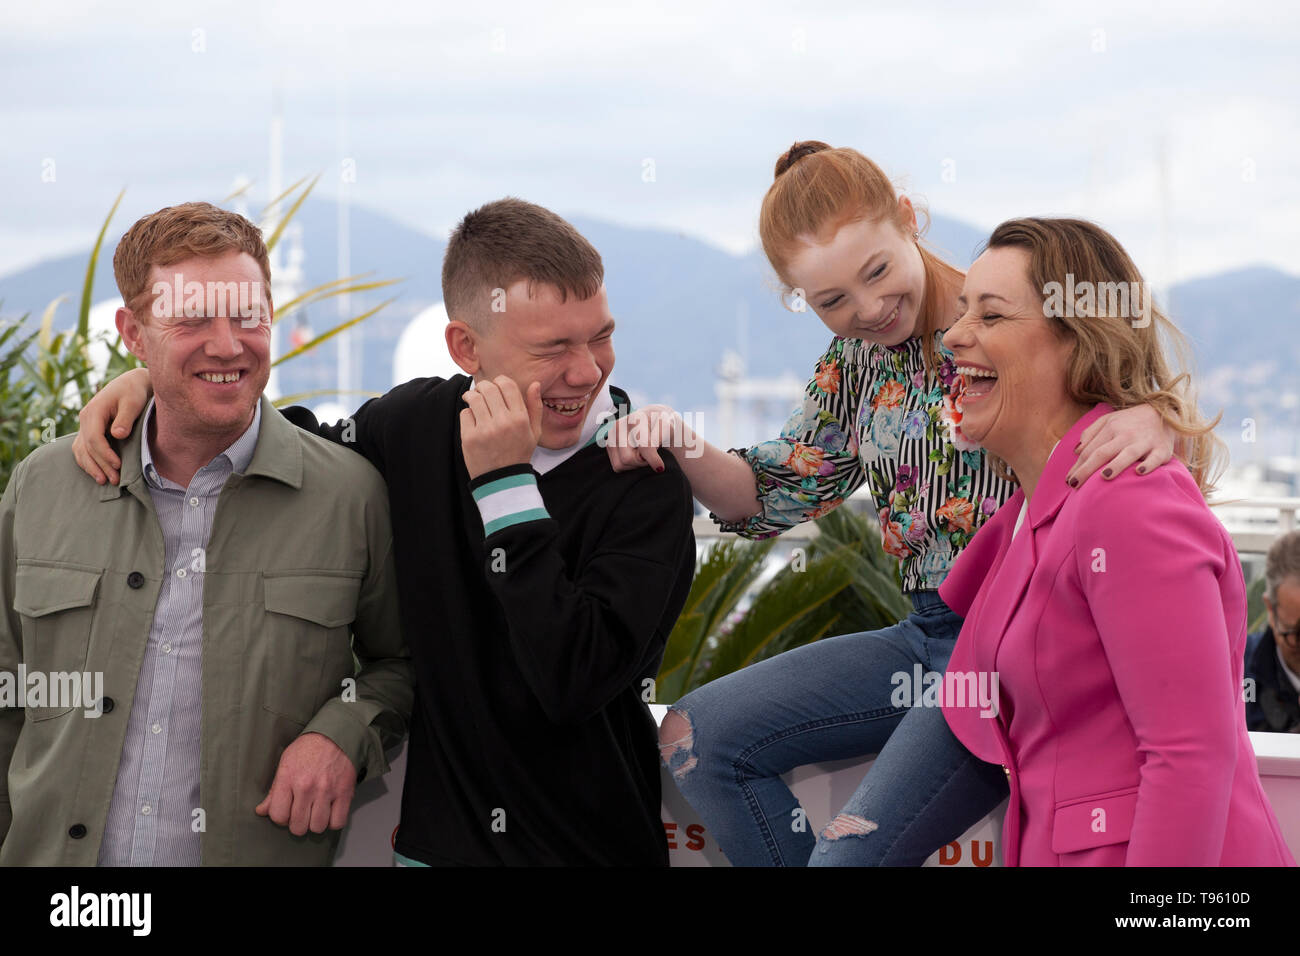 Kris Hitchen, Rhys Stone, Katie Proctor and Debbie Honeywood at Sorry We Missed You film photo call at the 72nd Cannes Film Festival, Friday 17th May 2019, Cannes, France. Photo Credit: Doreen Kennedy/Alamy Live News Stock Photo